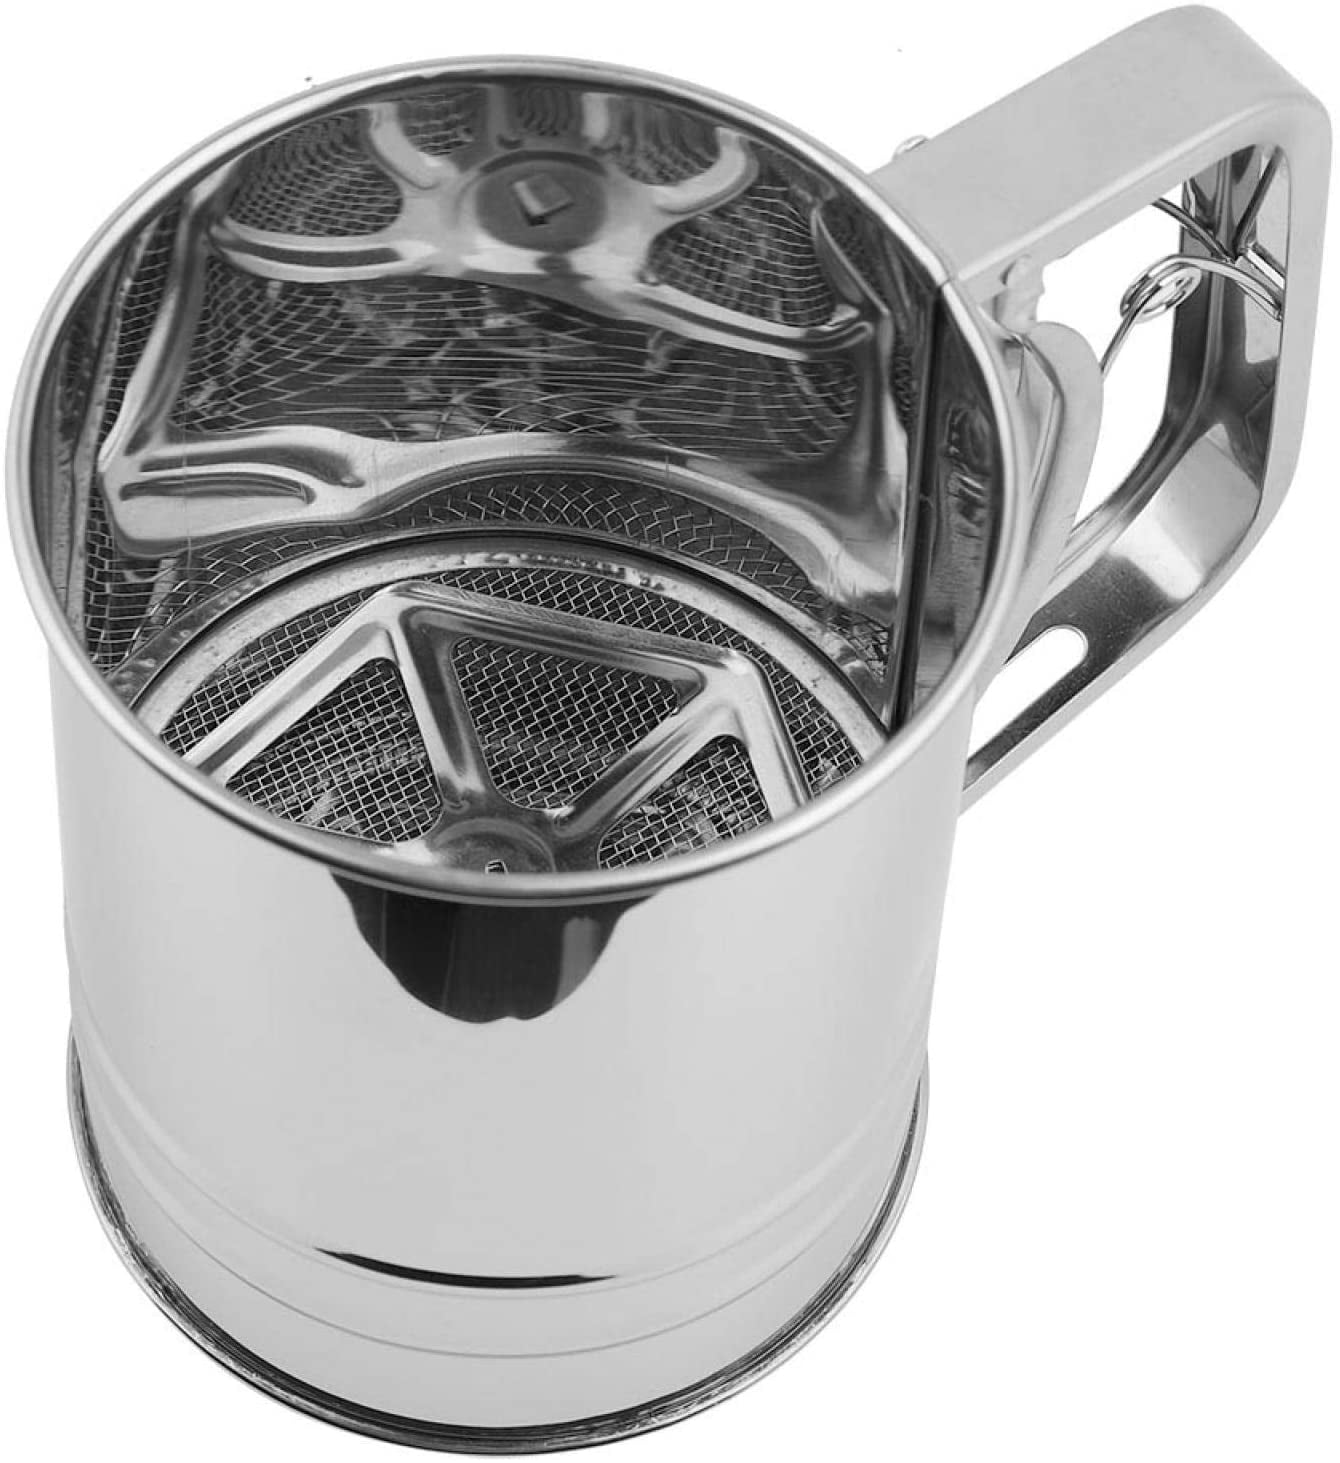 Stainless Steel Flour Dredger Flour Sifter Hand-held Icing Sugar Flour Sifter w/Handle Metal Squeezes Fine Mesh Sieve Strainer for Cake Cookie Baking Frying Kitchen Flour Sifter Cup 